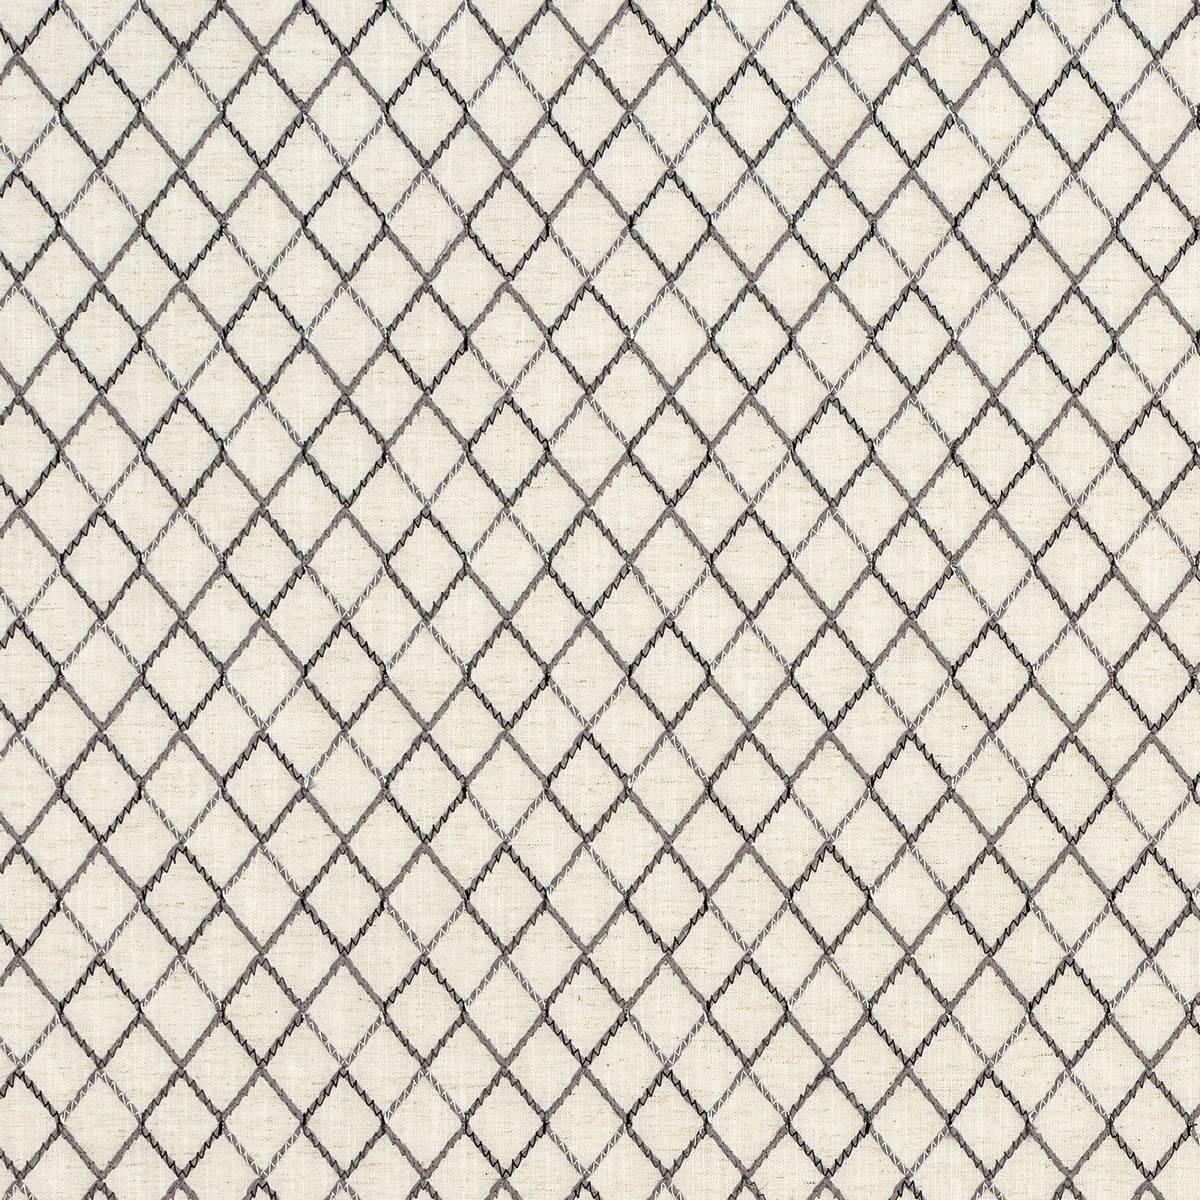 Woburn Dove Fabric by Porter & Stone